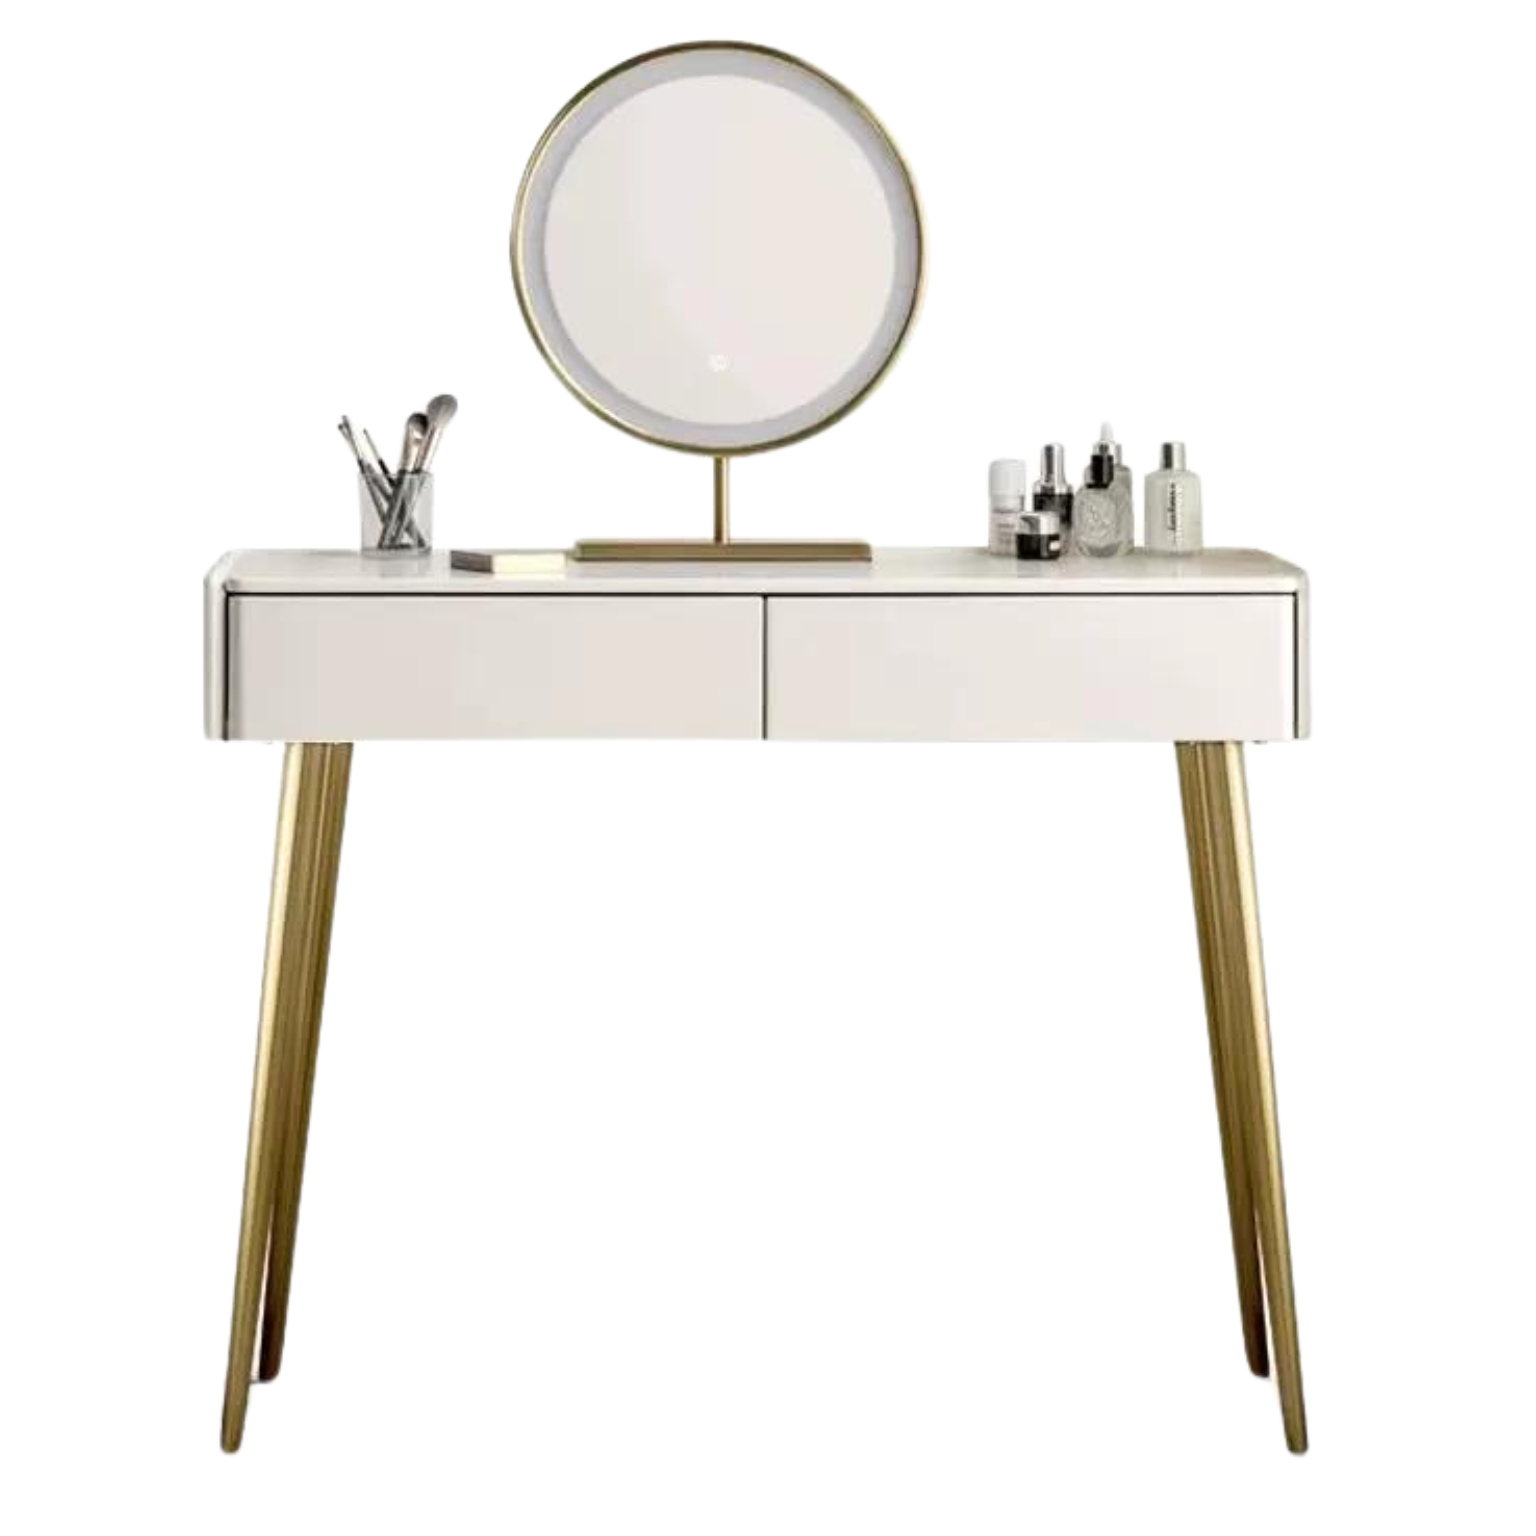 Poplar solid wood dressing table and cupboard integrated cream style: